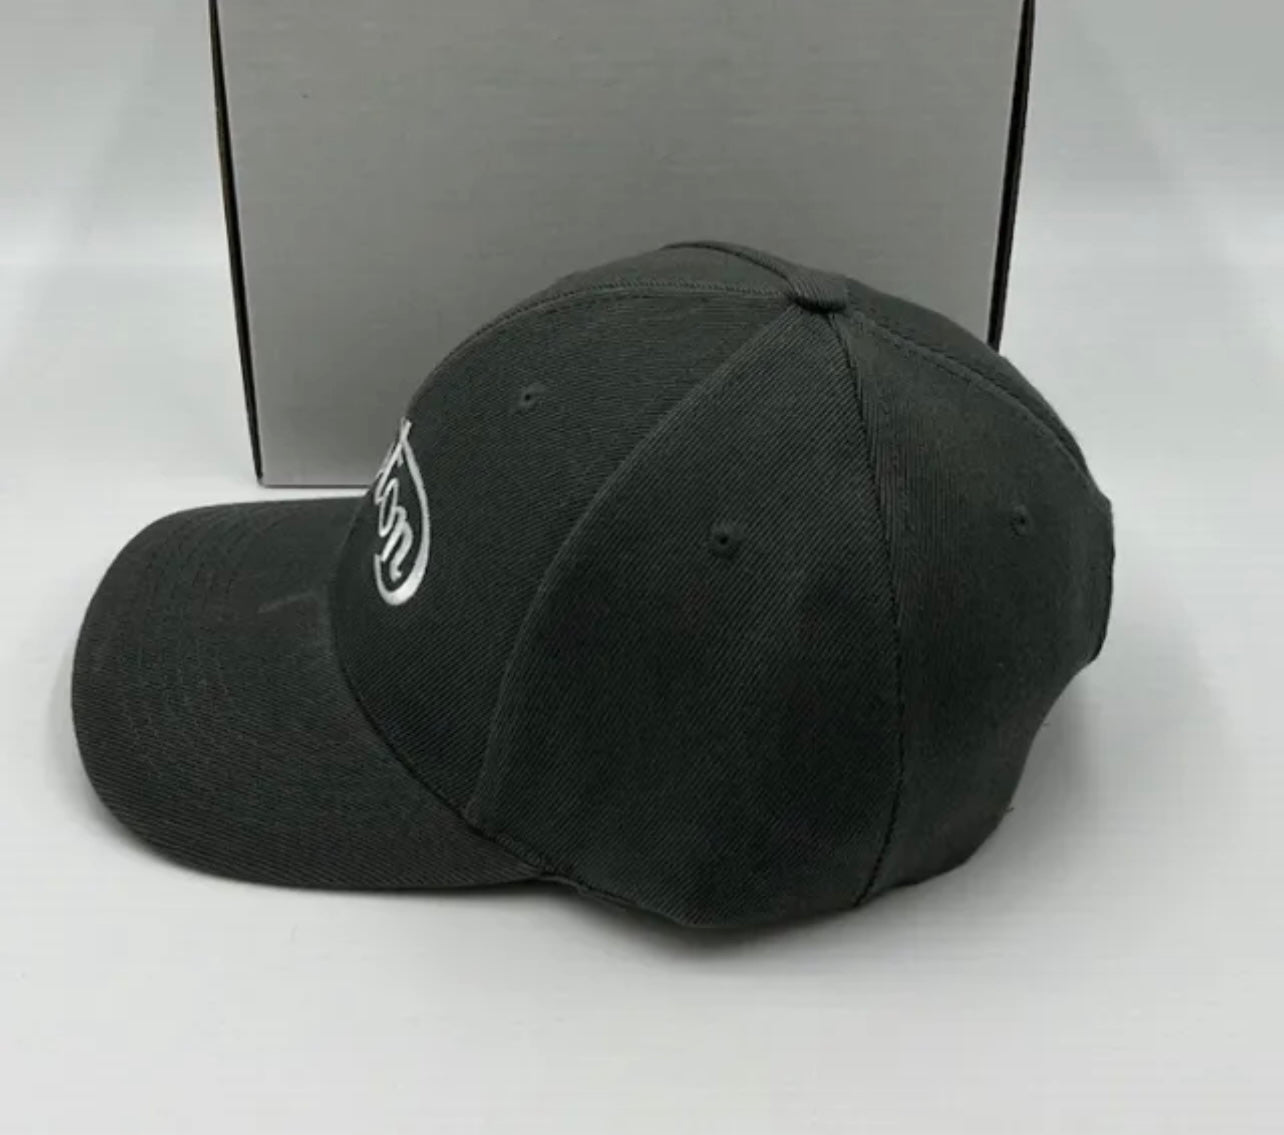 Norton Embroidered Hat